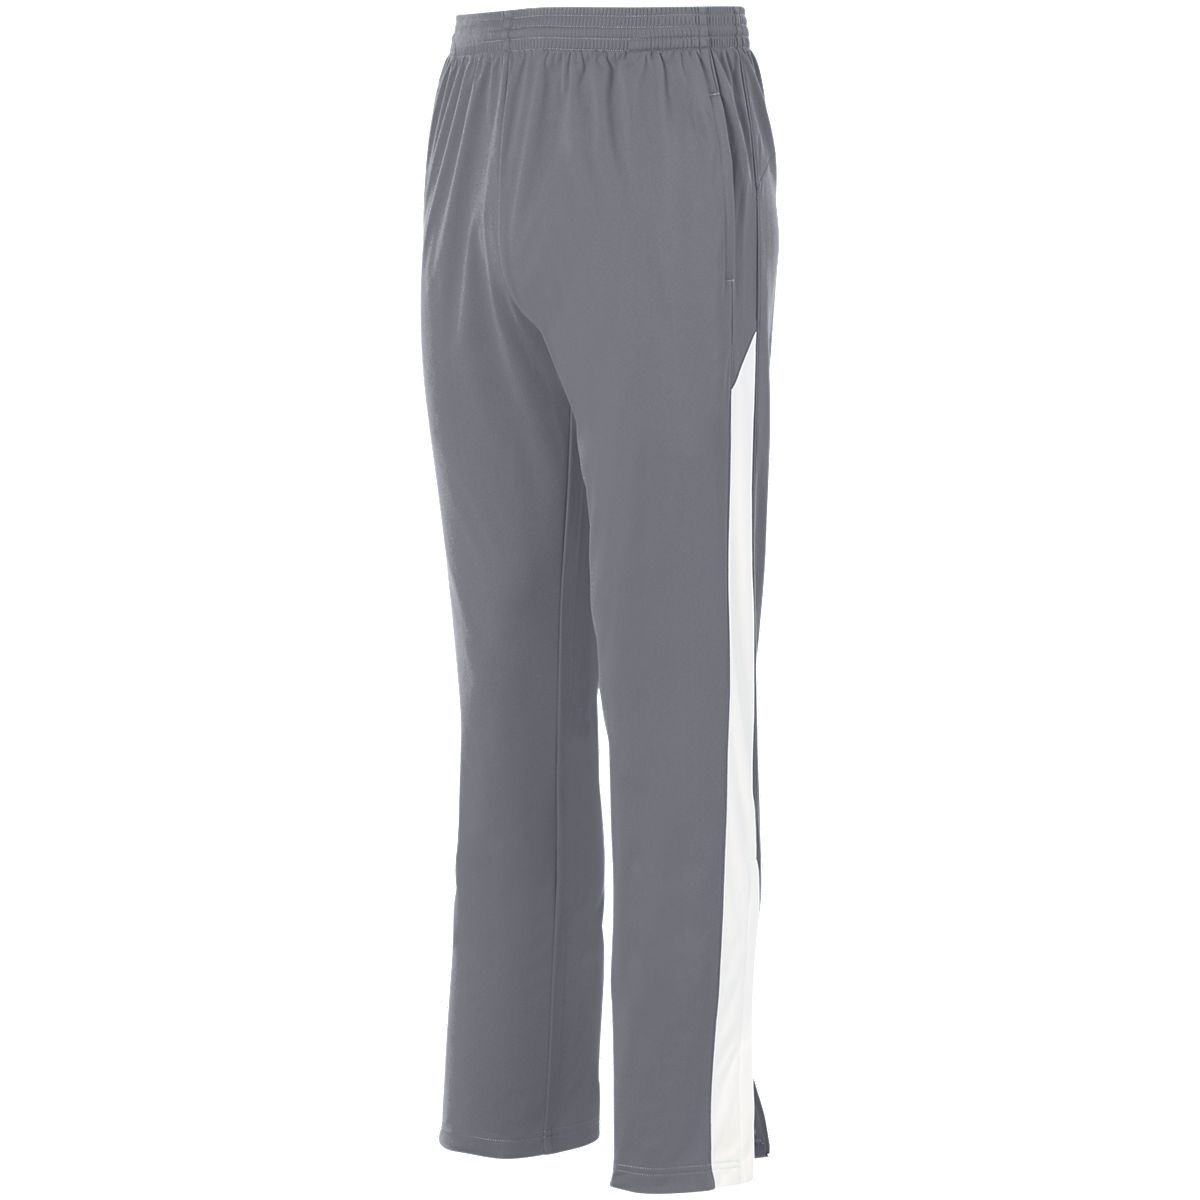 Augusta Sportswear Medalist Pant 2.0 in Graphite/White  -Part of the Adult, Adult-Pants, Pants, Augusta-Products product lines at KanaleyCreations.com